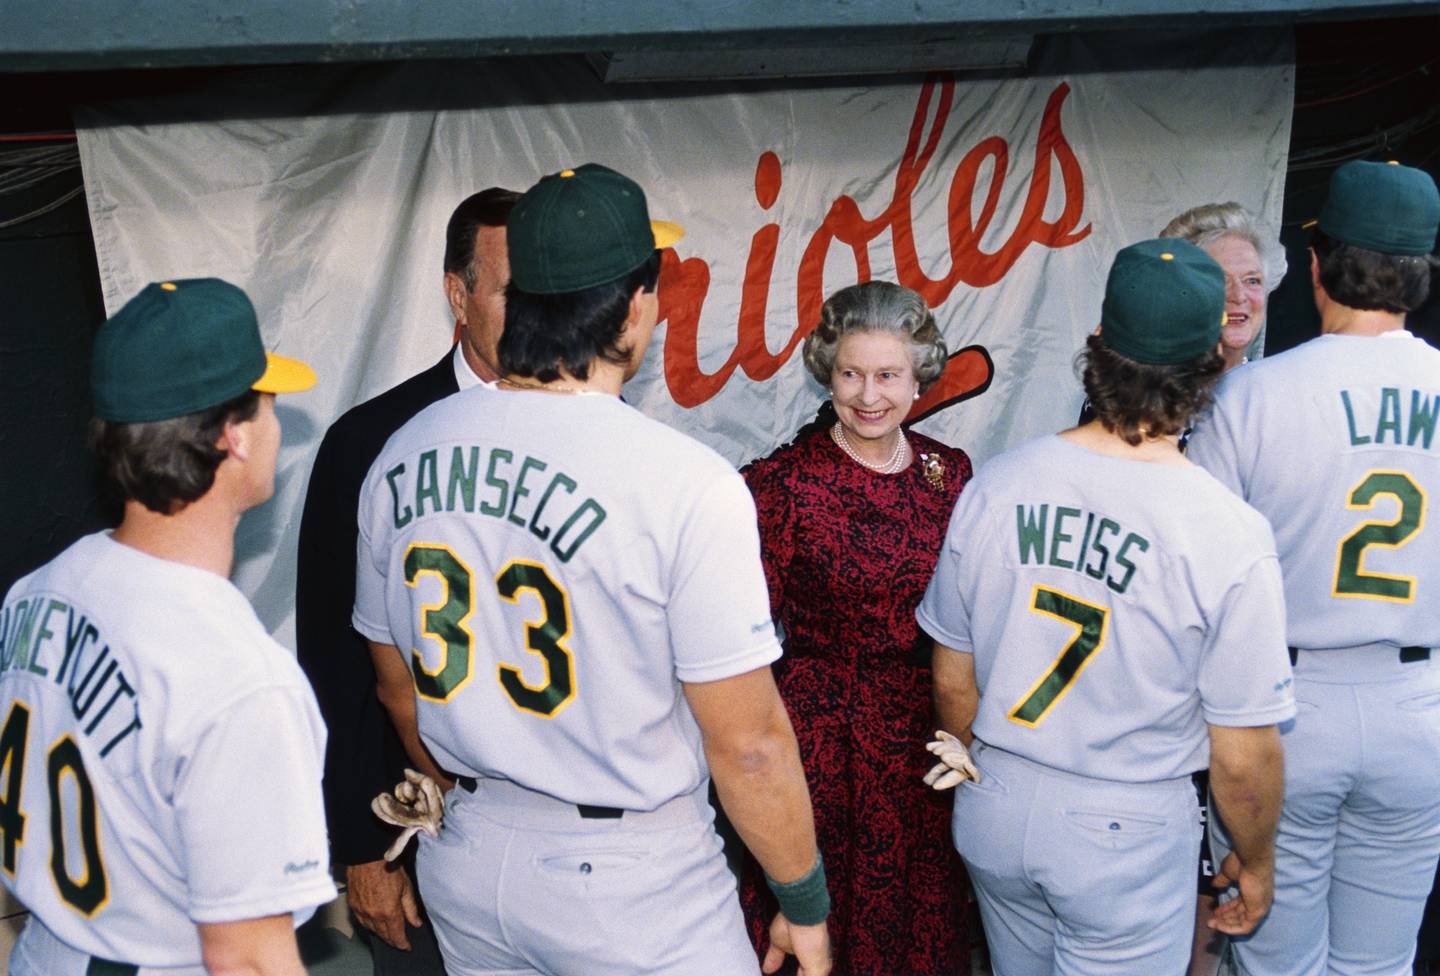 Oakland Athletics' Rick Honeycutt, Jose Canseco, Walt Weiss, and Vance Law (left to right), walk past and greet President George Bush, Queen Elizabeth II, and Barbara Bush following a game against the Orioles in Baltimore, Maryland